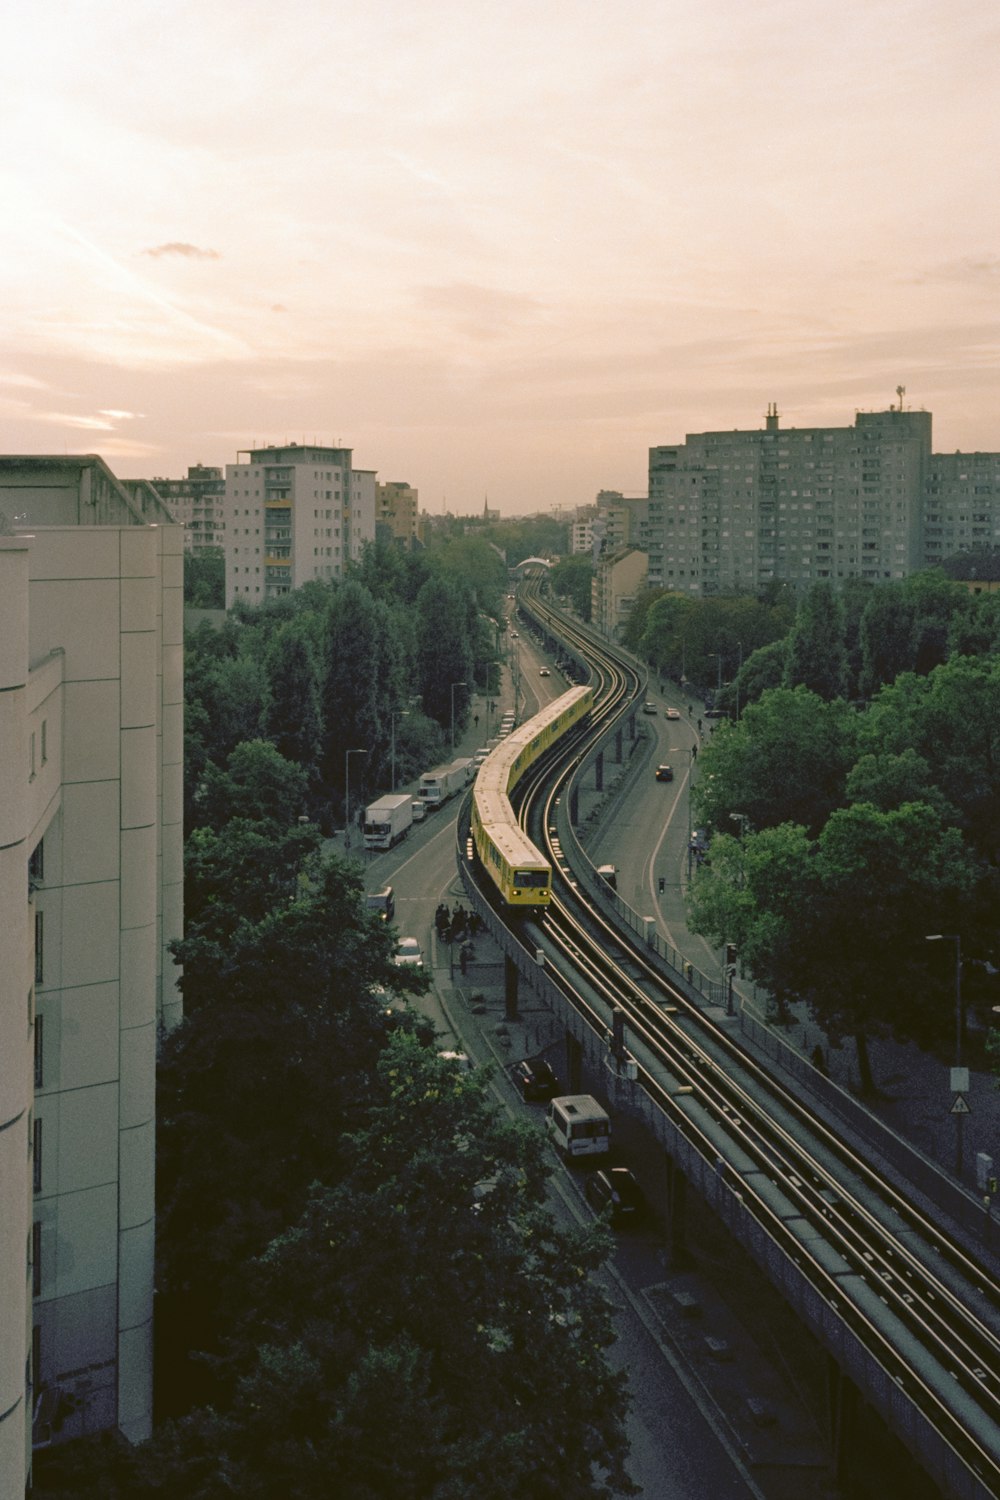 a train on a train track in a city